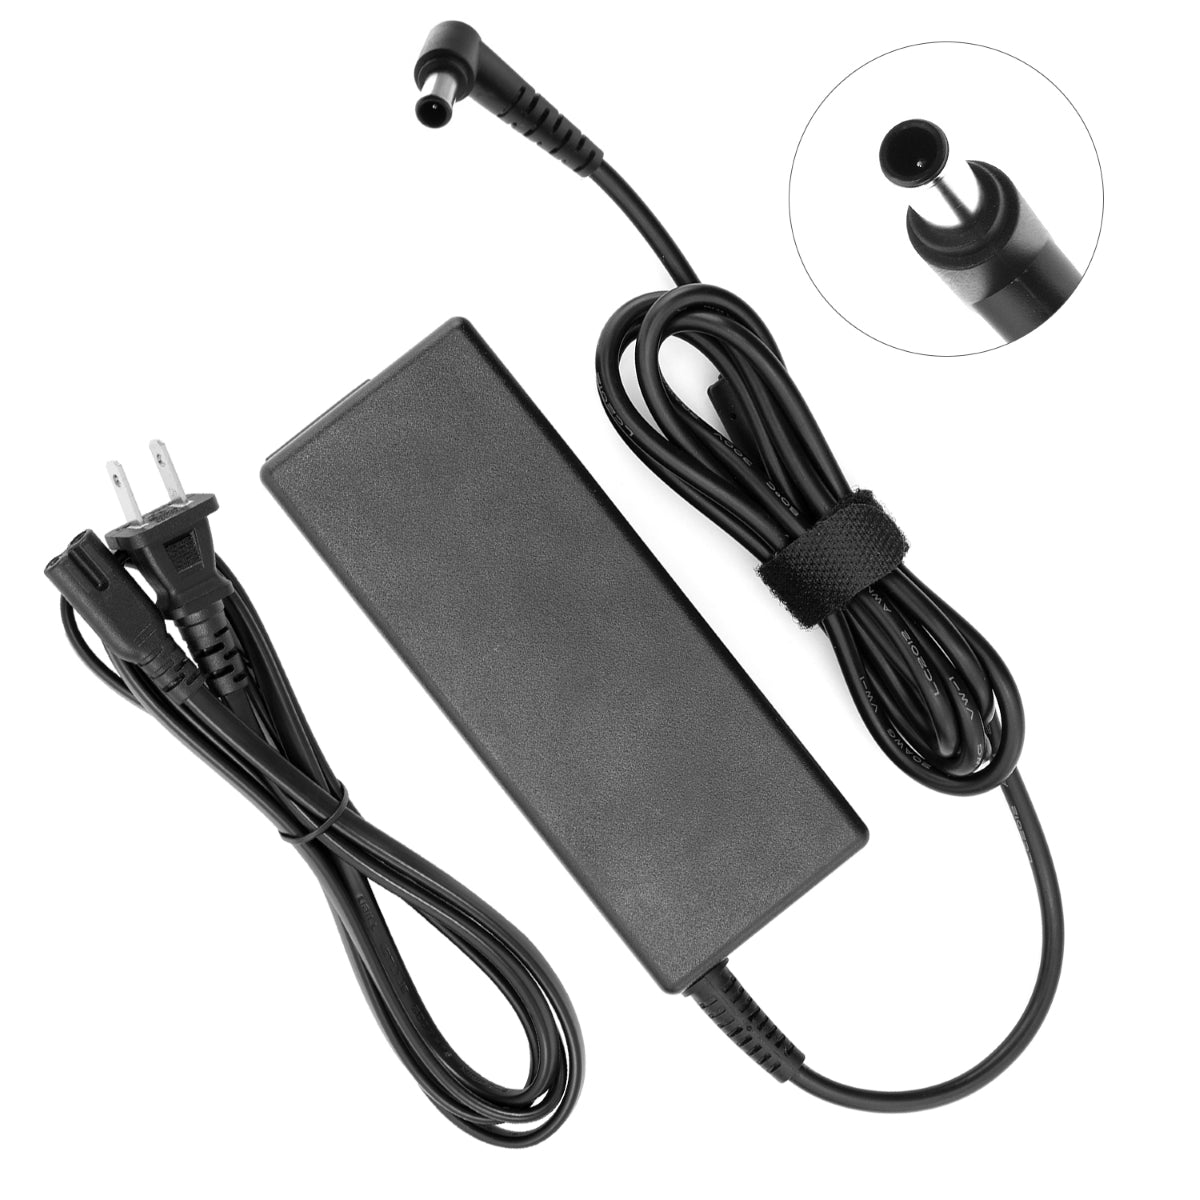 Compatible Replacement Fujitsu Lifebook P5020 Charger